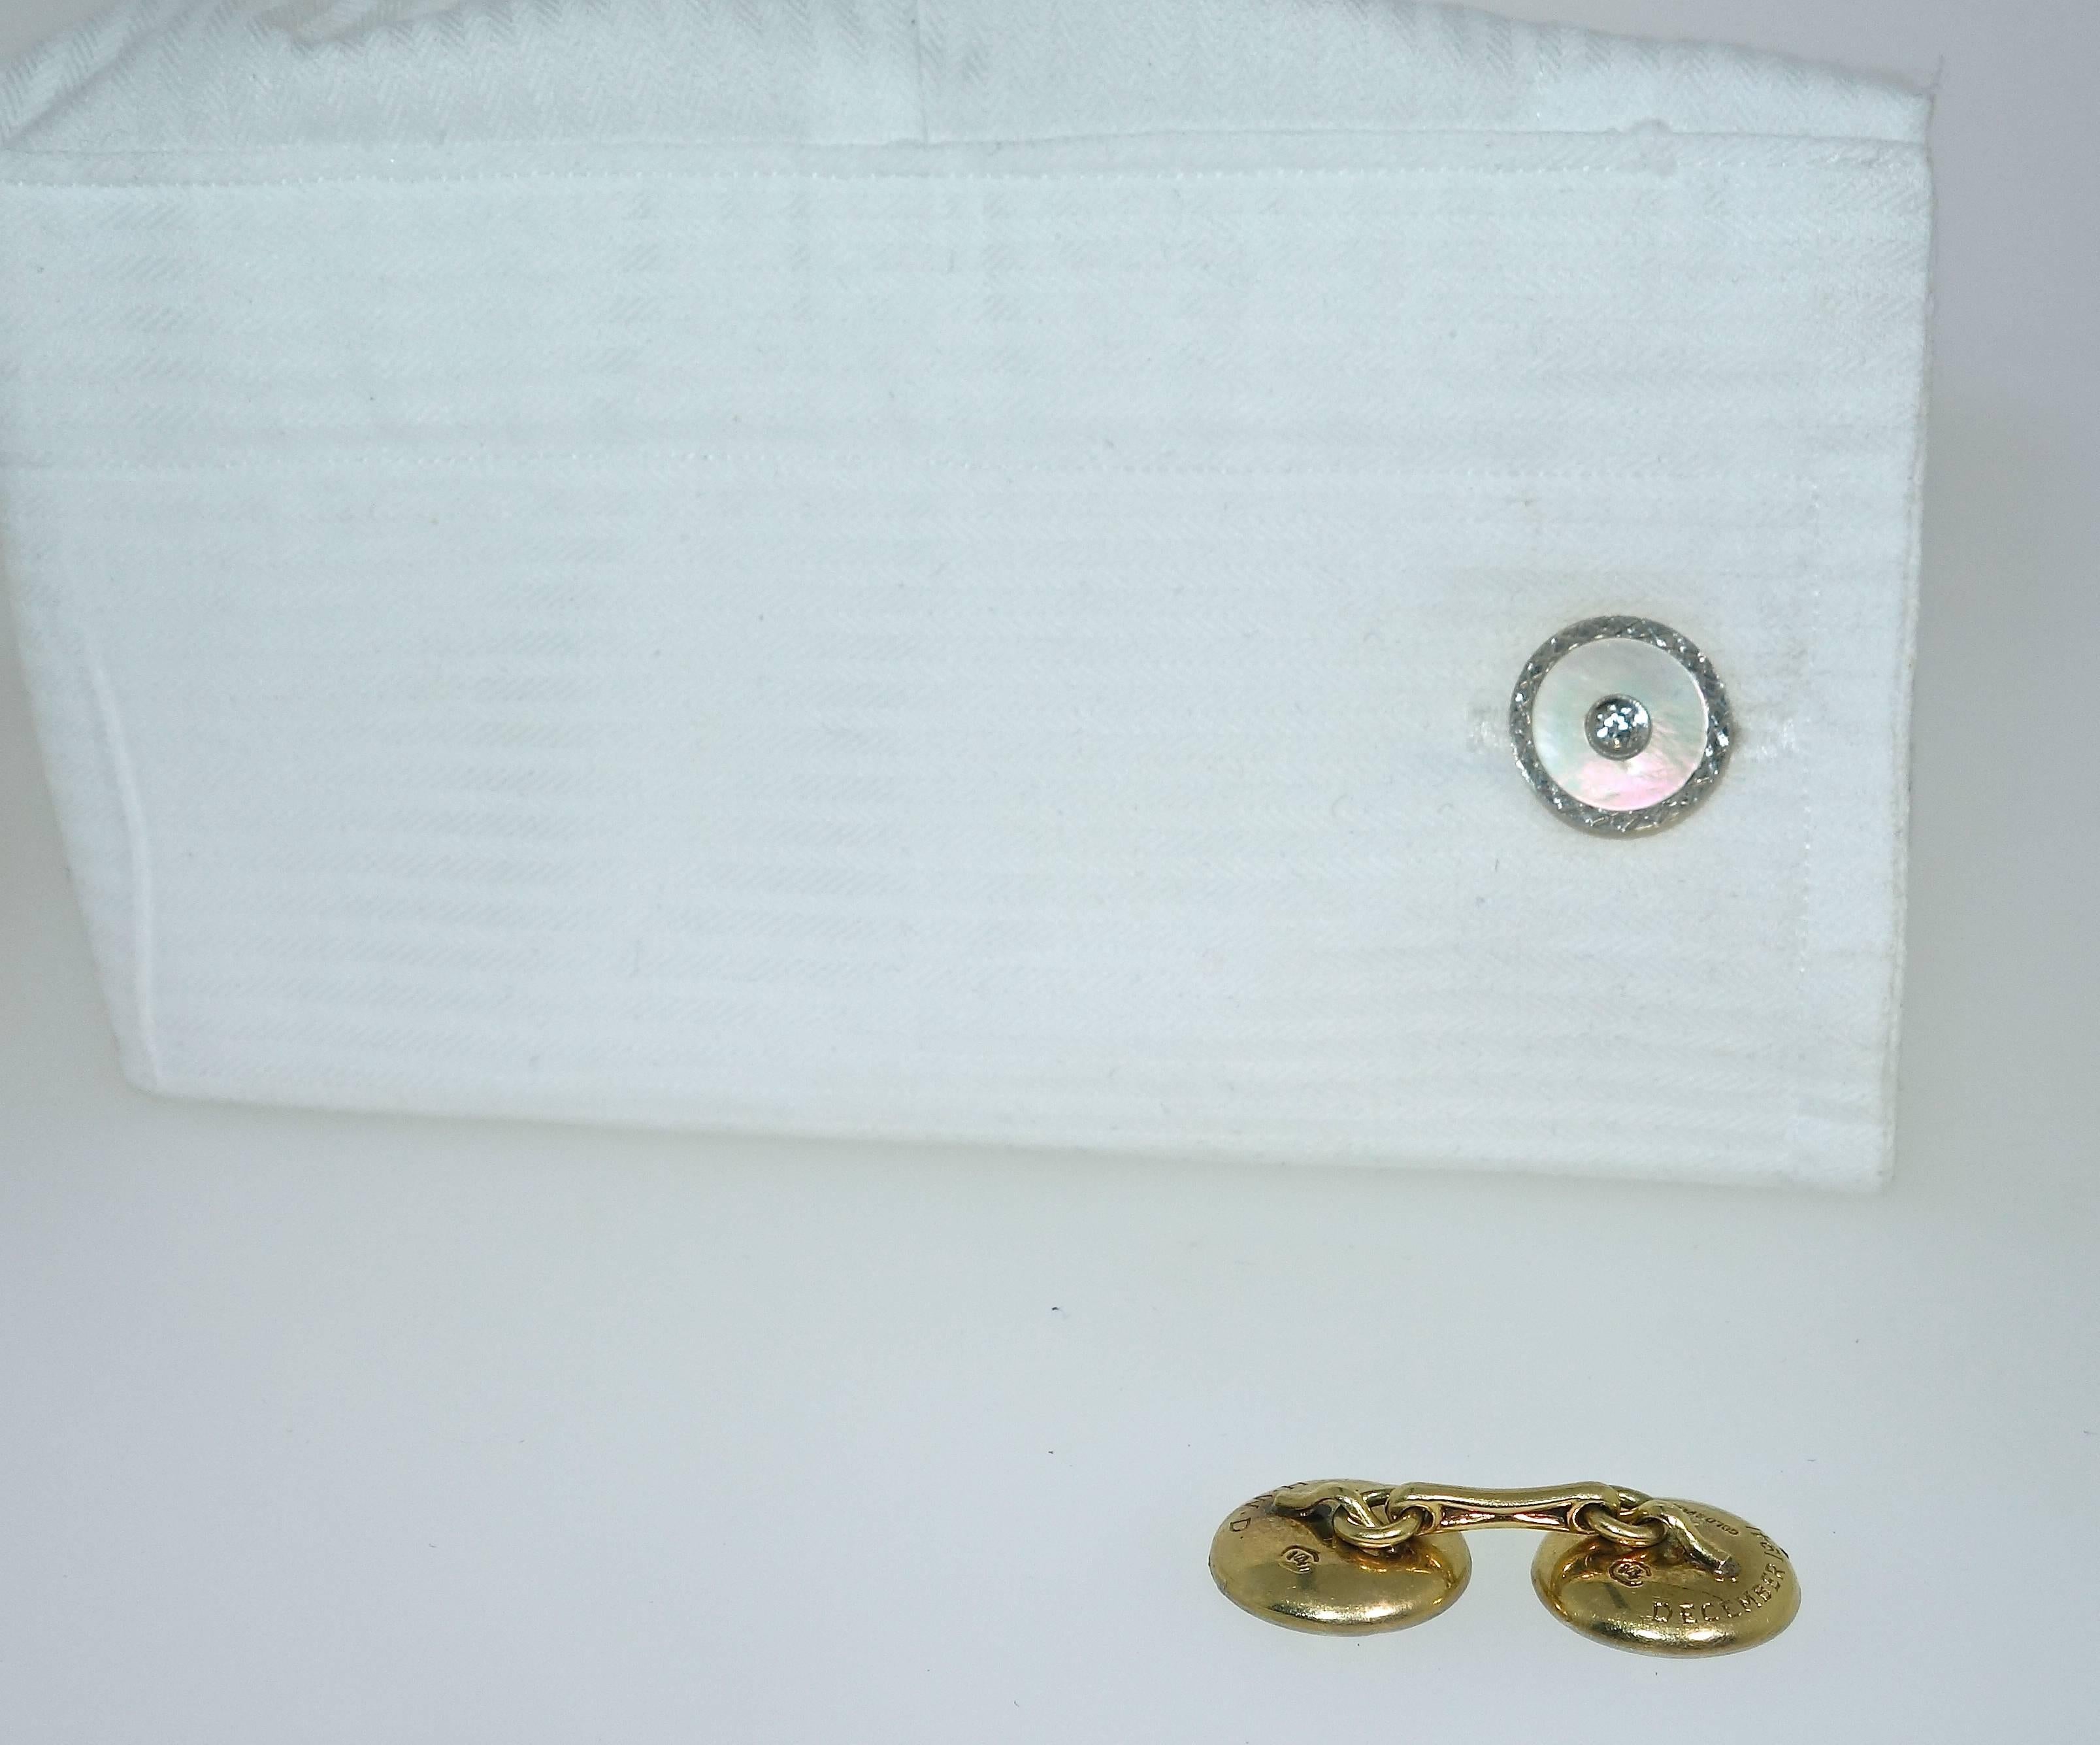 Art Deco Vintage Diamond Cufflinks with Mother of Pearl in Platinum, circa 1925